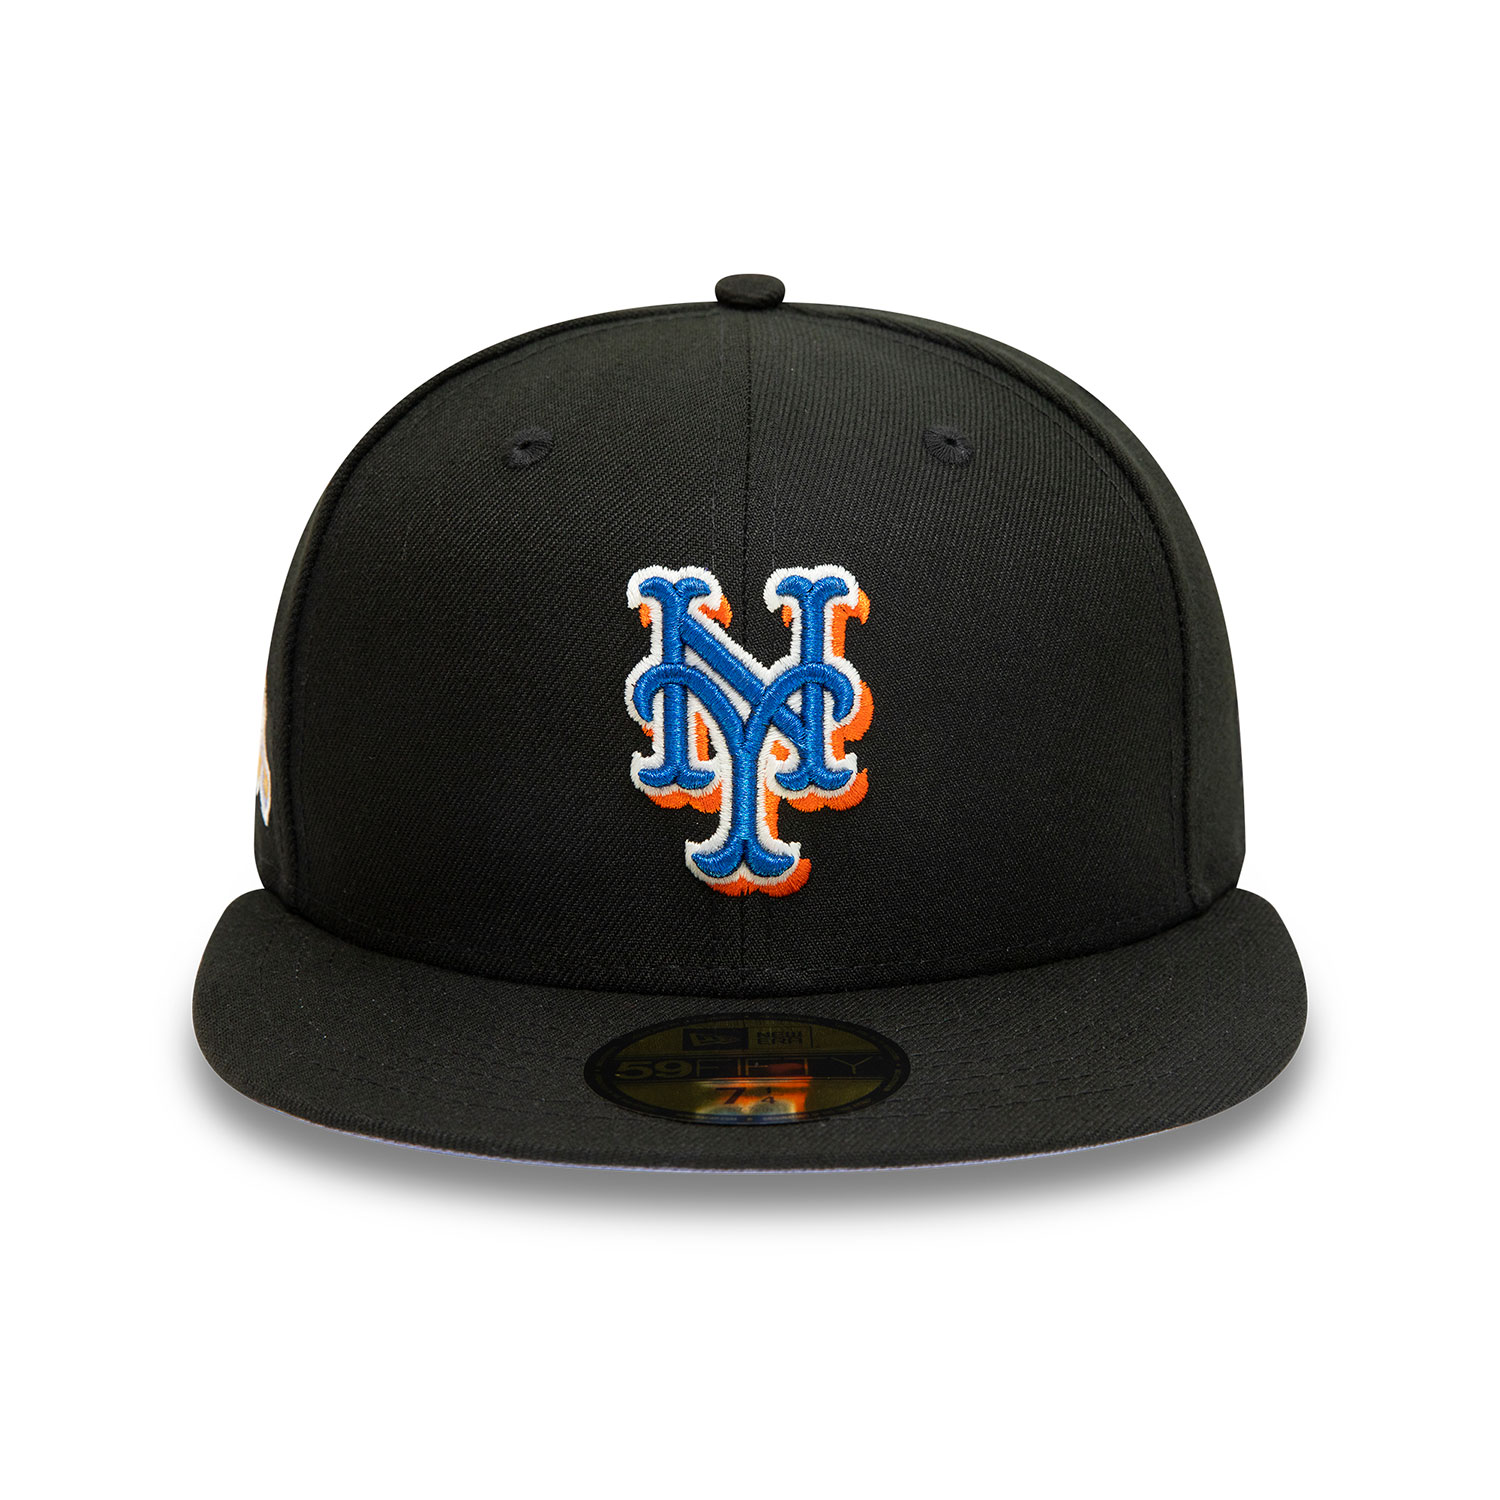 Official New Era New York Mets MLB Black 59FIFTY Fitted Cap B8098_281